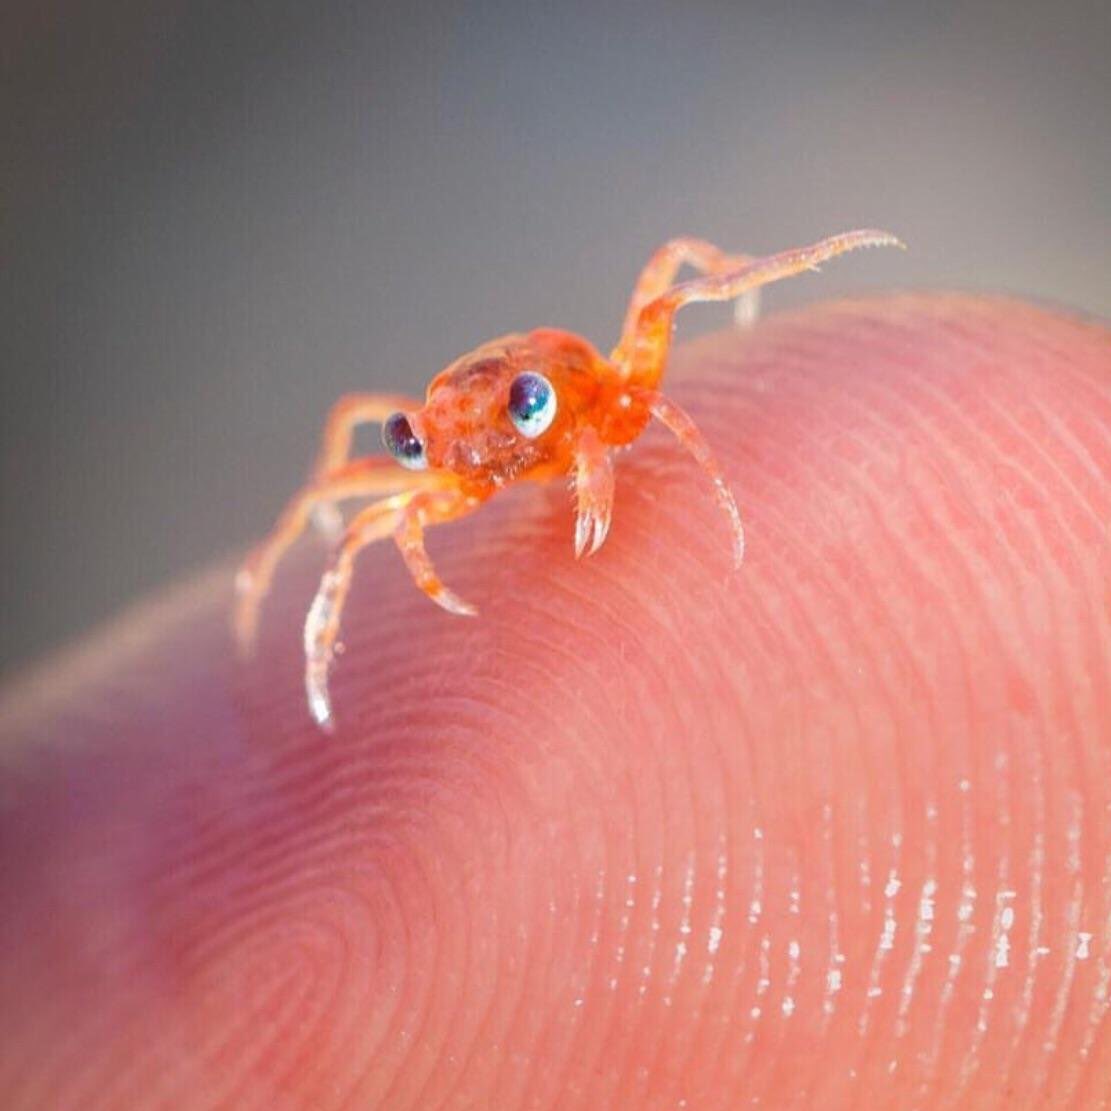 Namjoon look at this tiny crab. Isn’t it cute? Well it’s sad because it misses you so you better do something about that  @BTS_twt